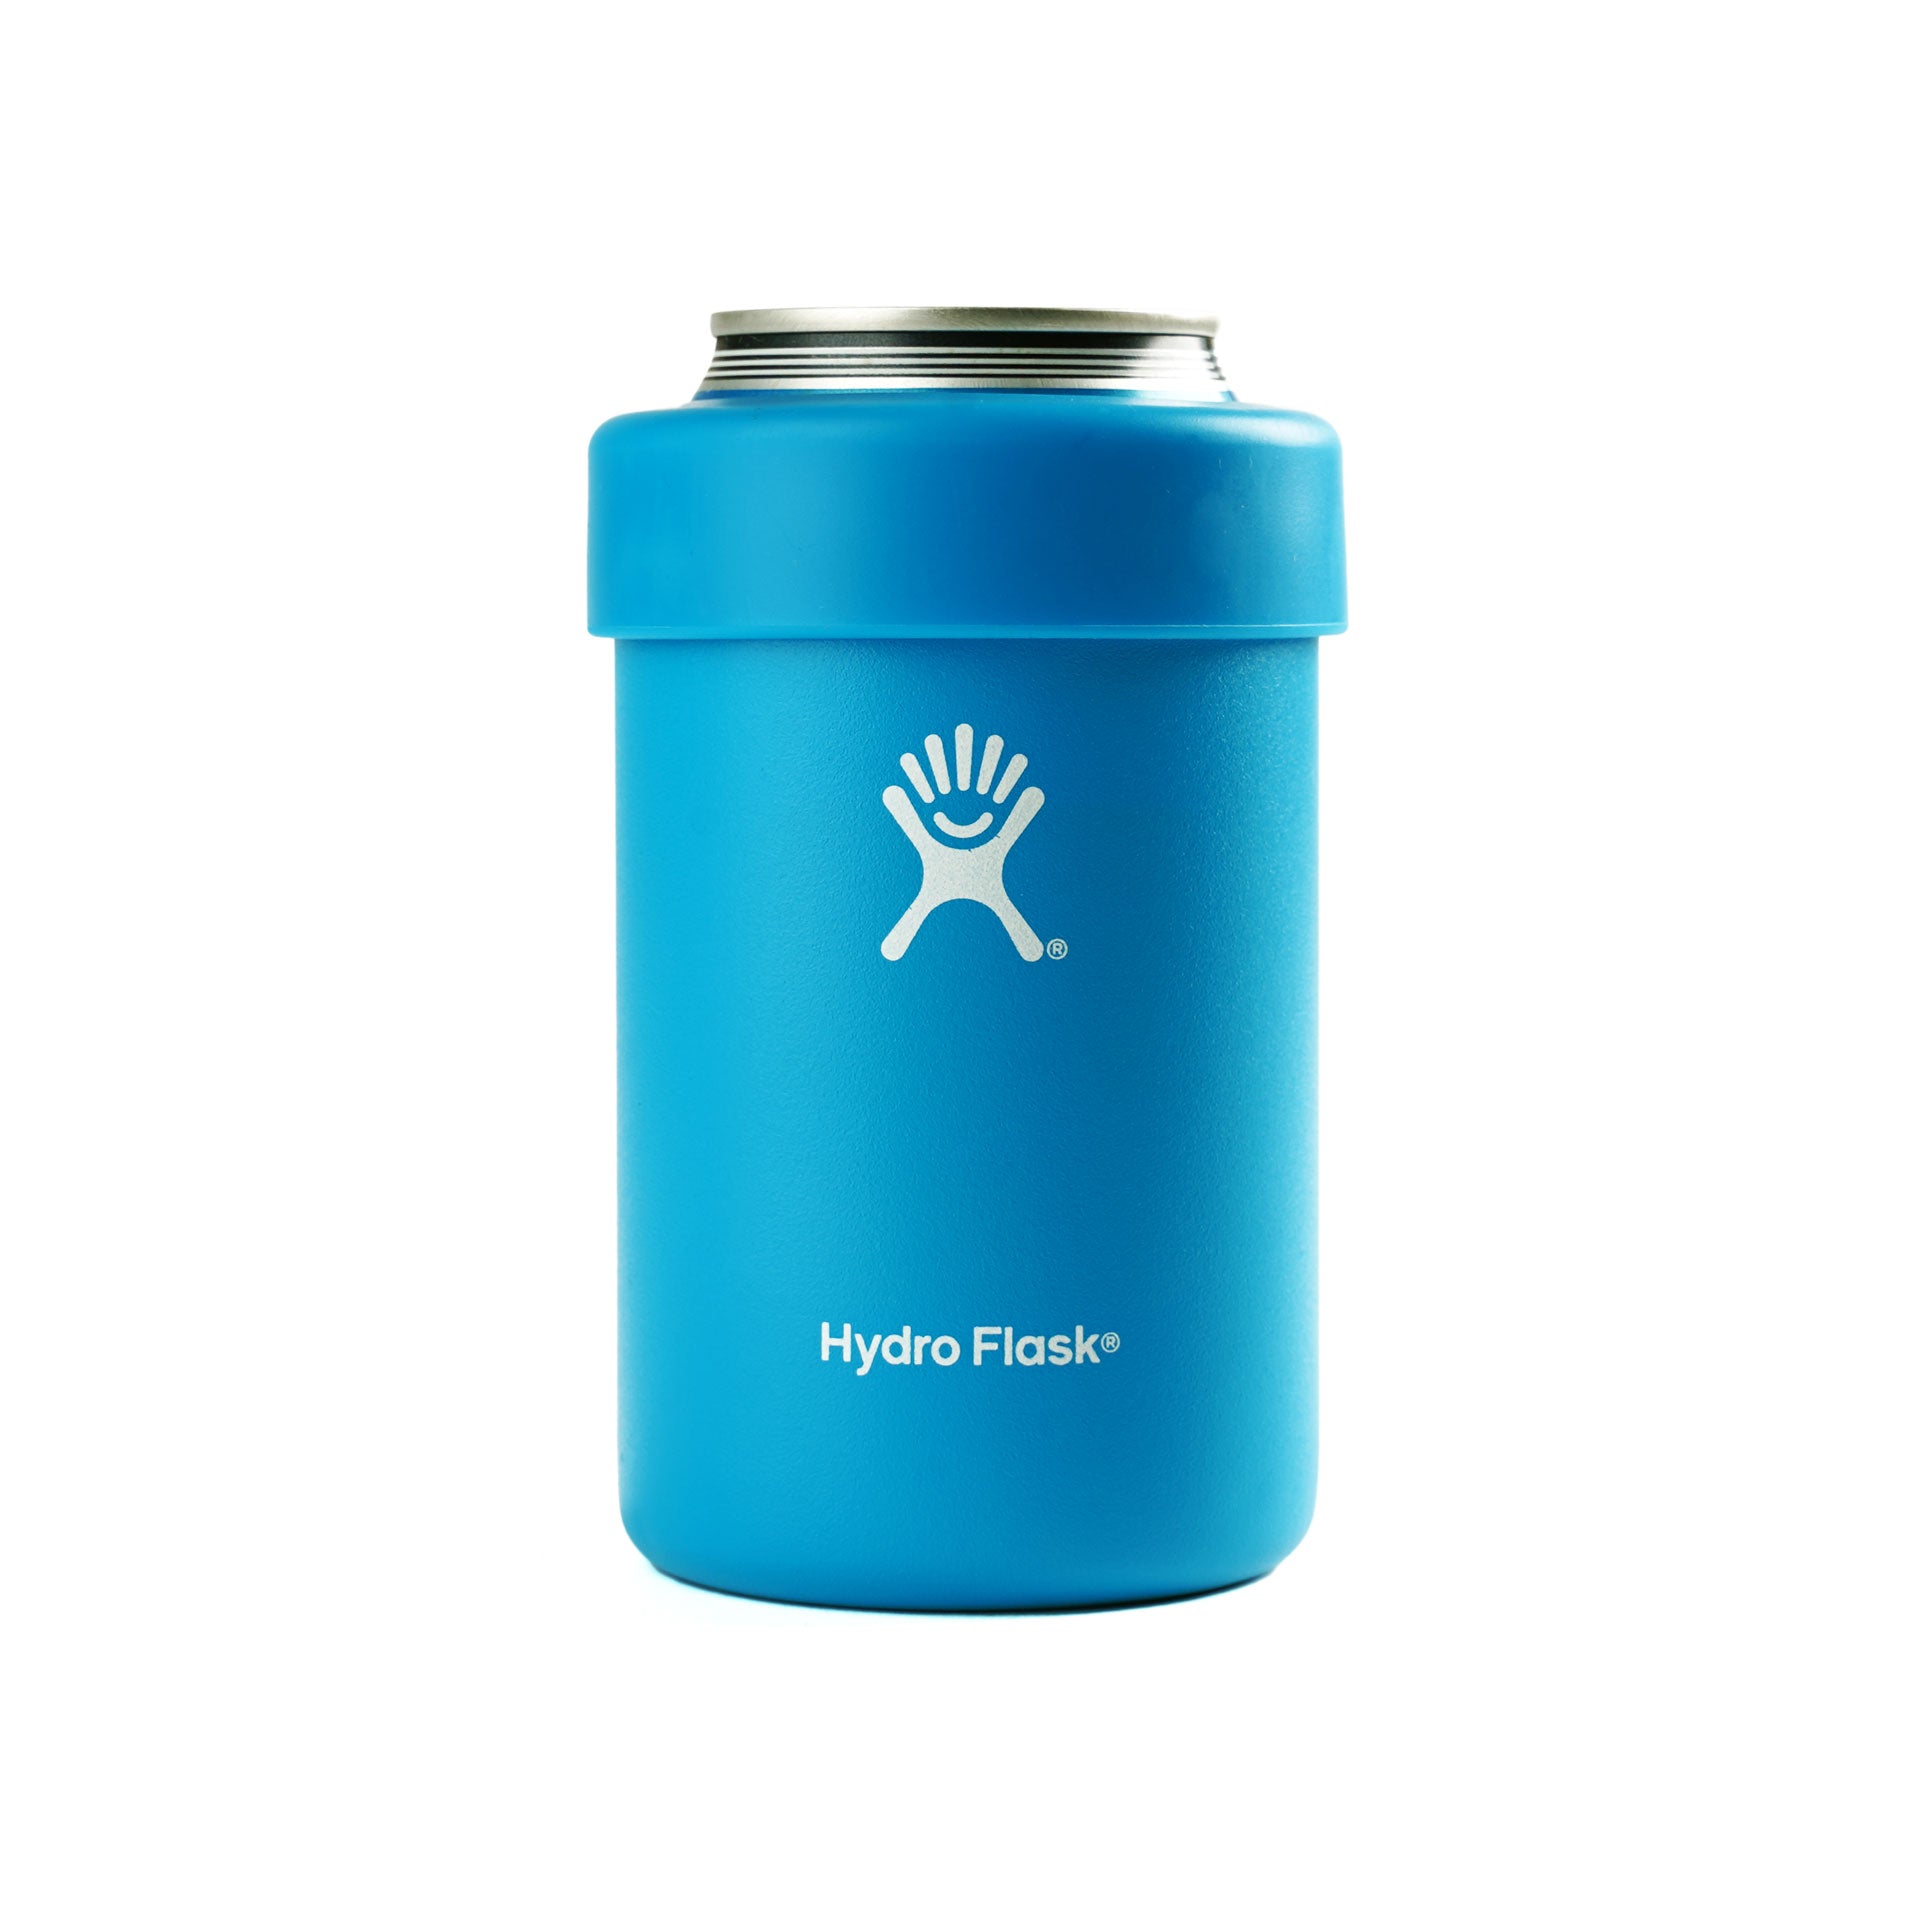 Hydro Flask Cooler Cup